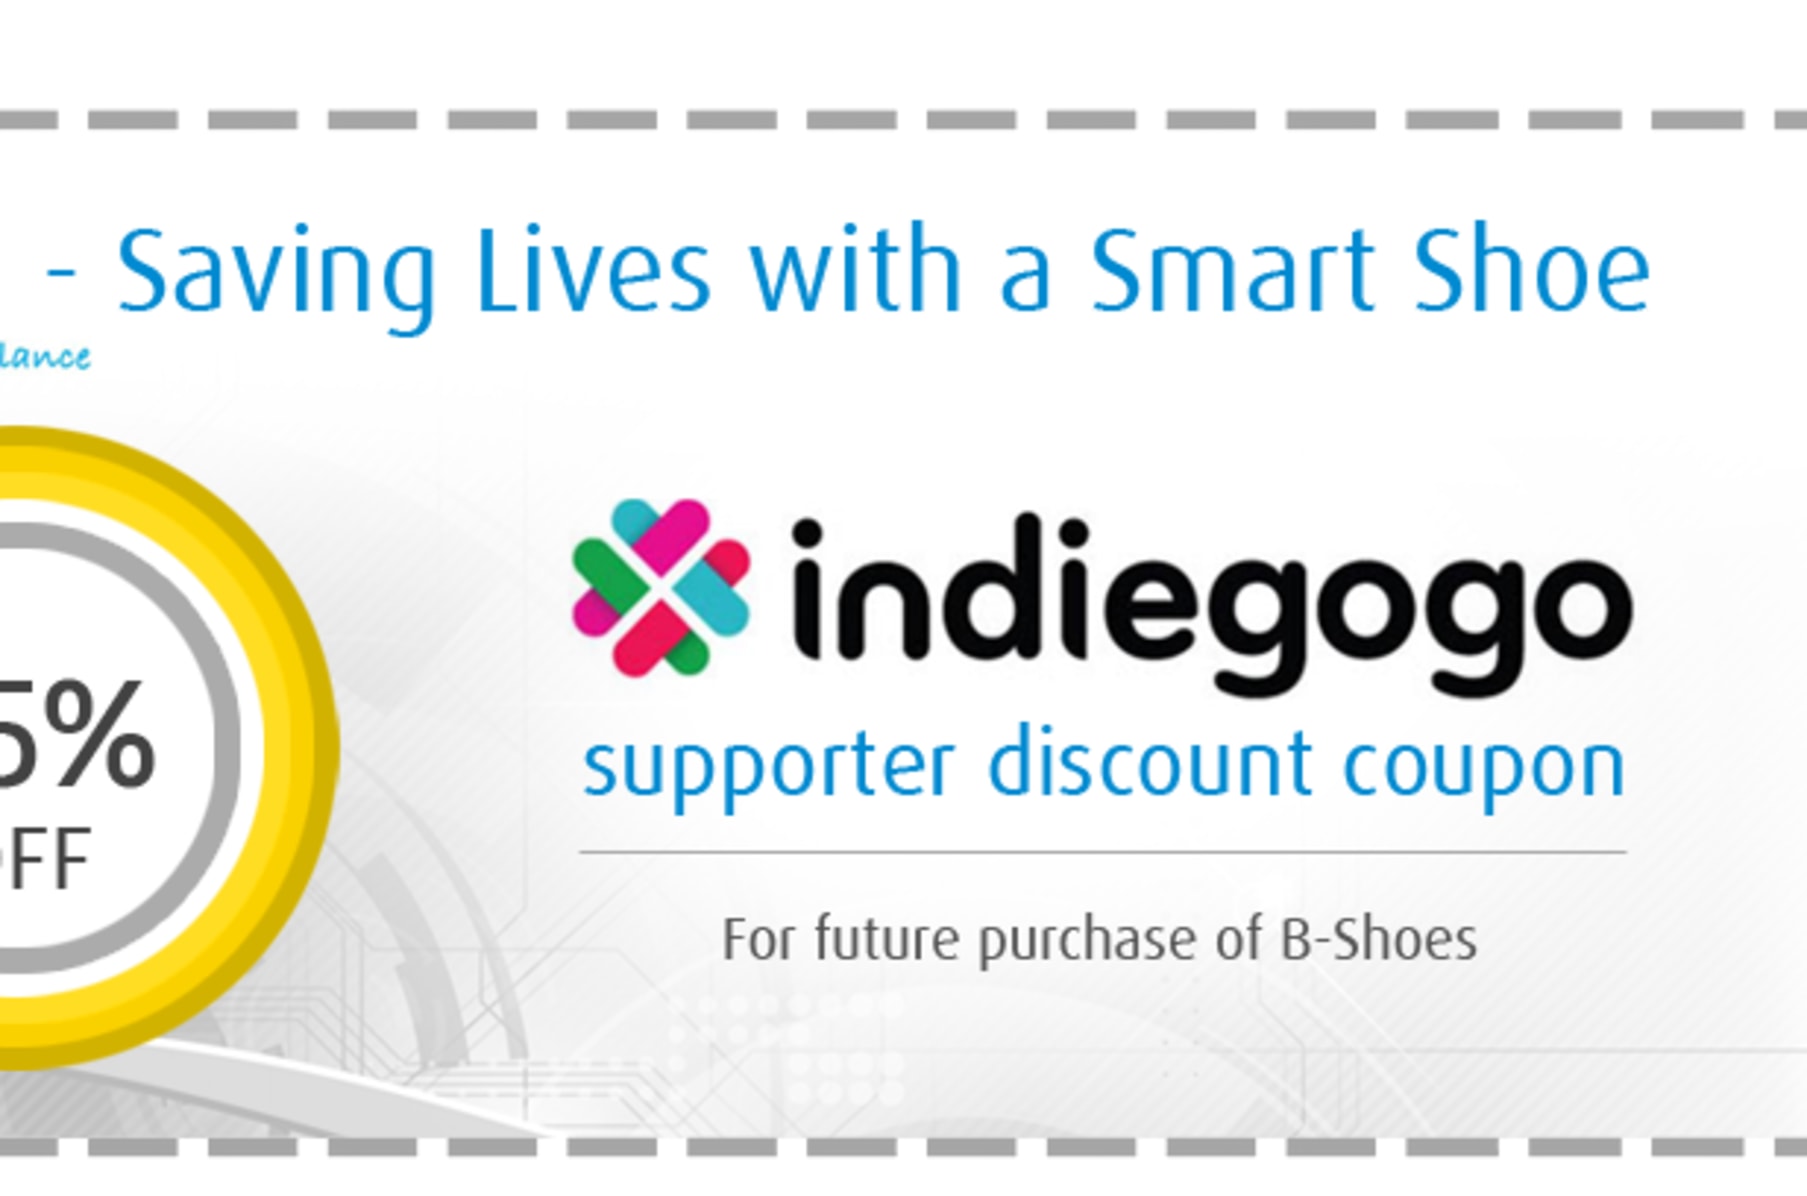 B-Shoe - The smart shoe that can save grandpa from falling | Indiegogo